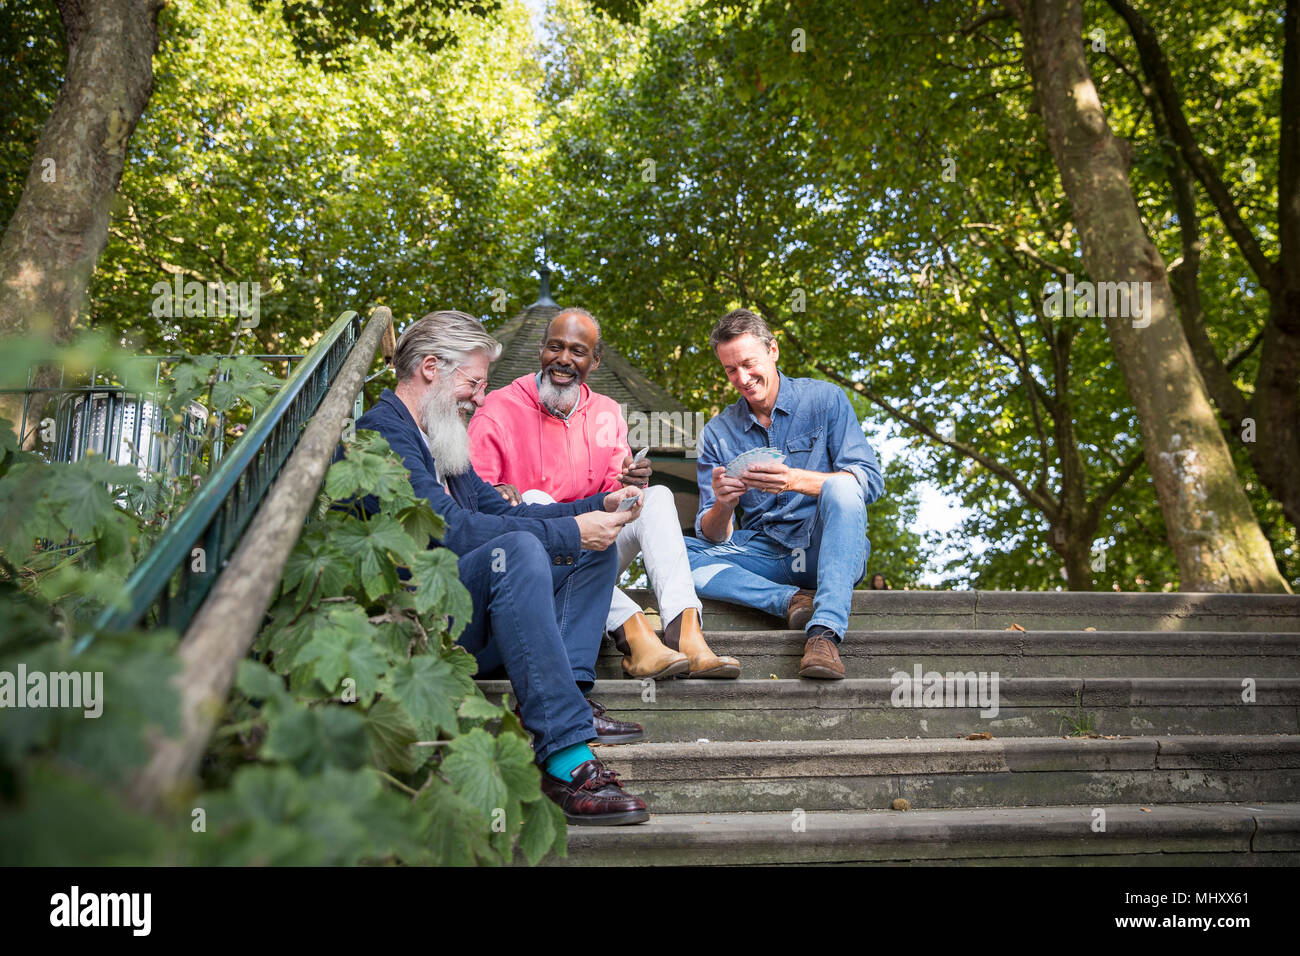 Three mature men, outdoors, sitting on steps, playing cards, low angle view Stock Photo